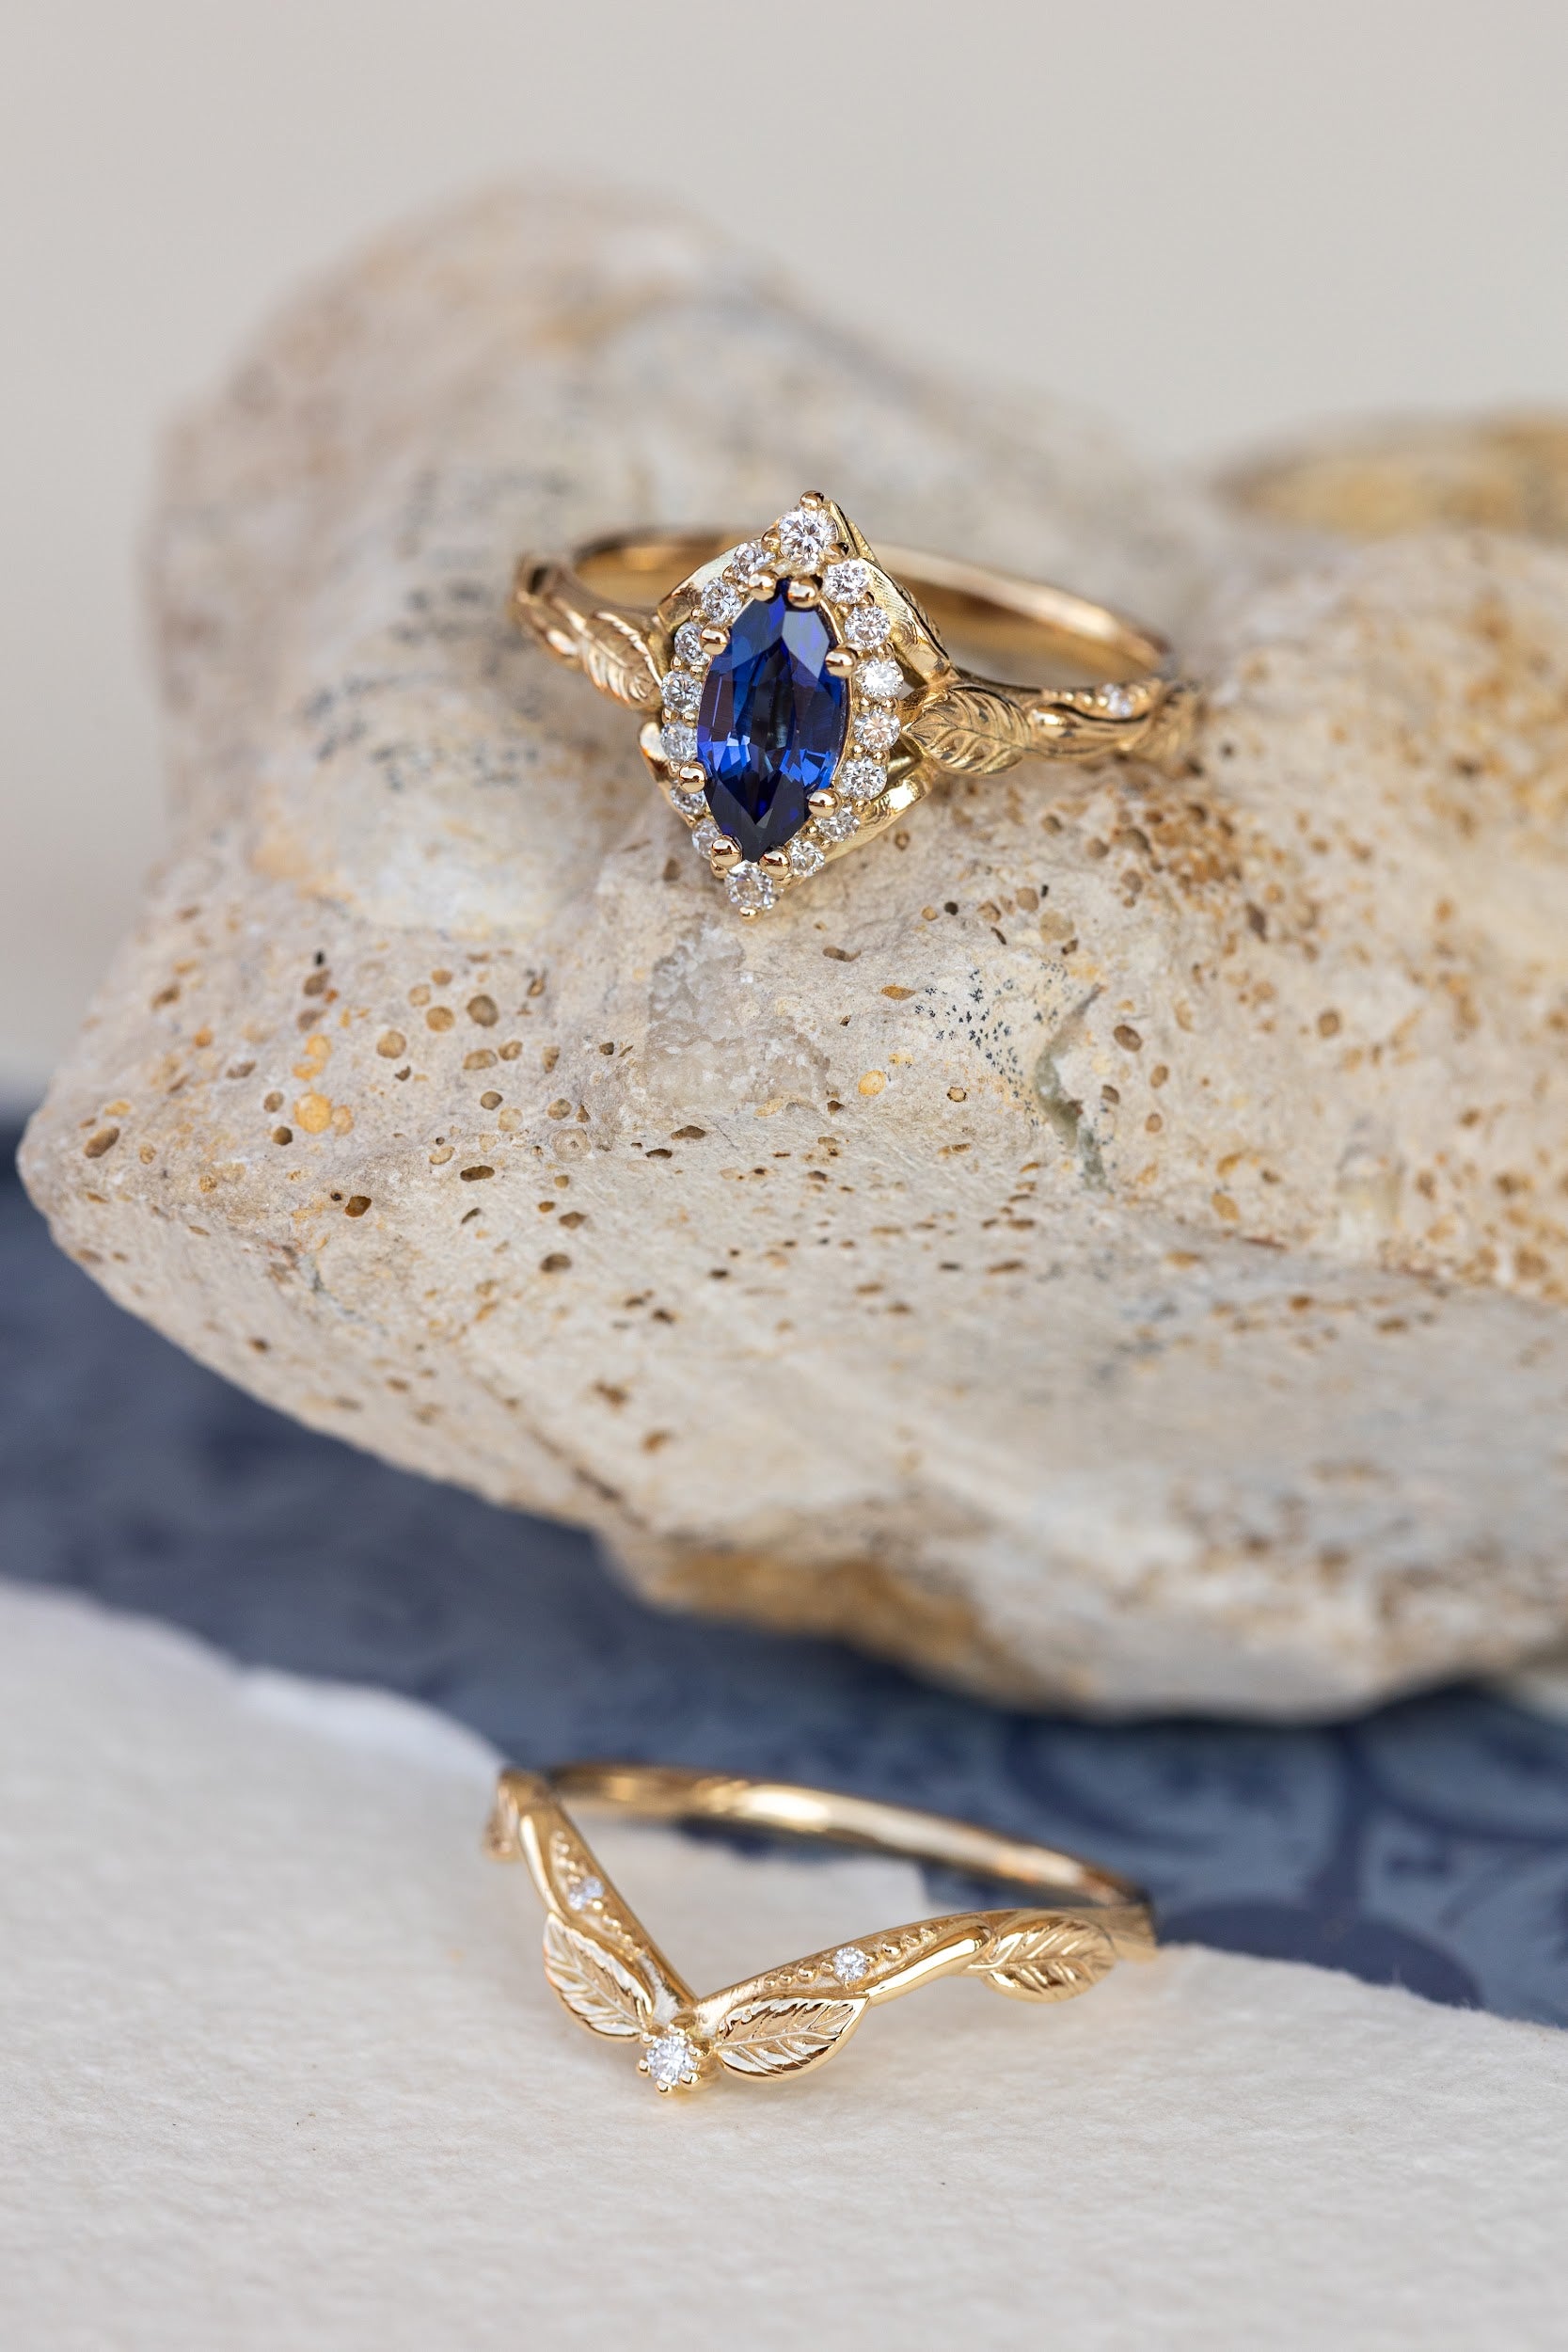 Dark blue lab sapphire engagement ring, gold proposal ring with marquise cut gemstone and diamond halo / Florentina